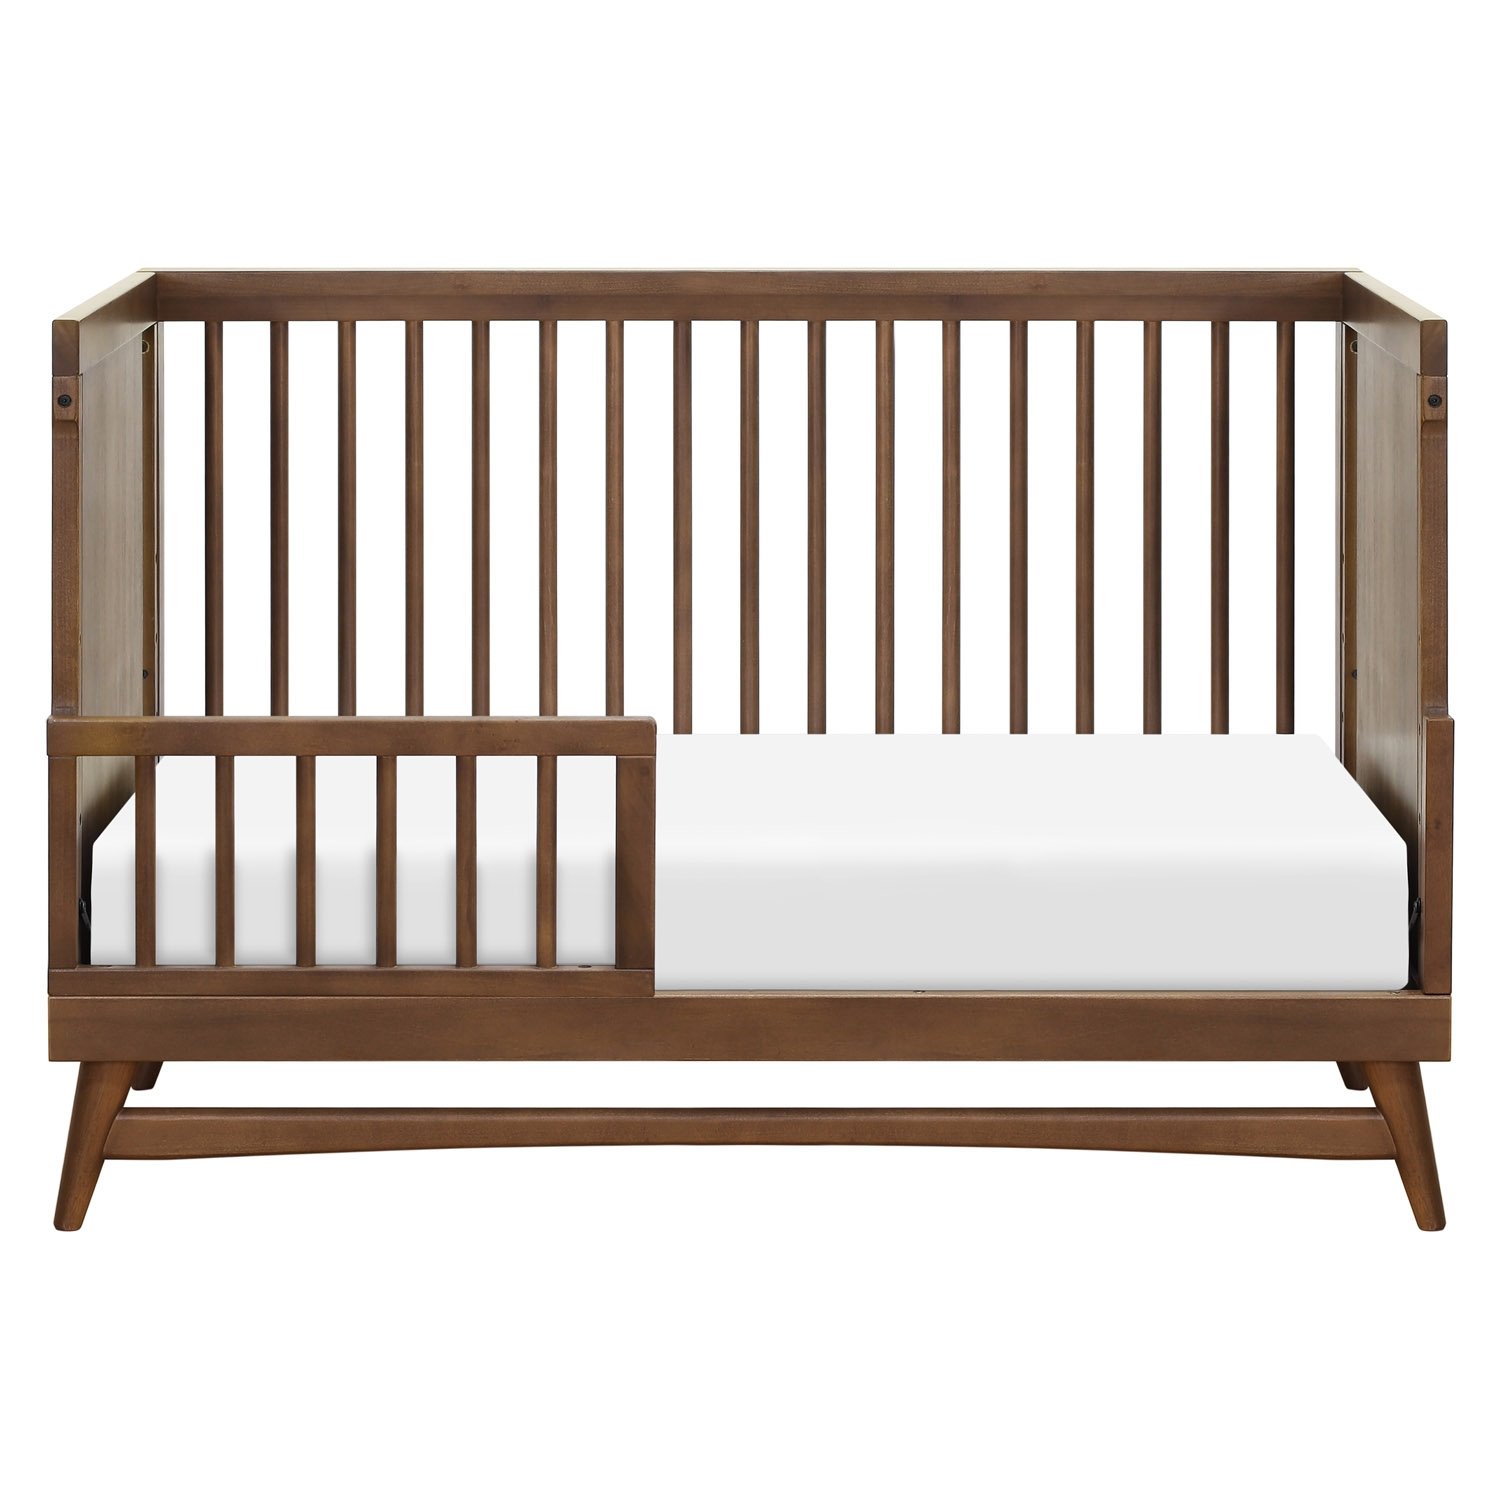 Babyletto Peggy Mid Century Modern Brown Wood Convertible Crib - Image 3